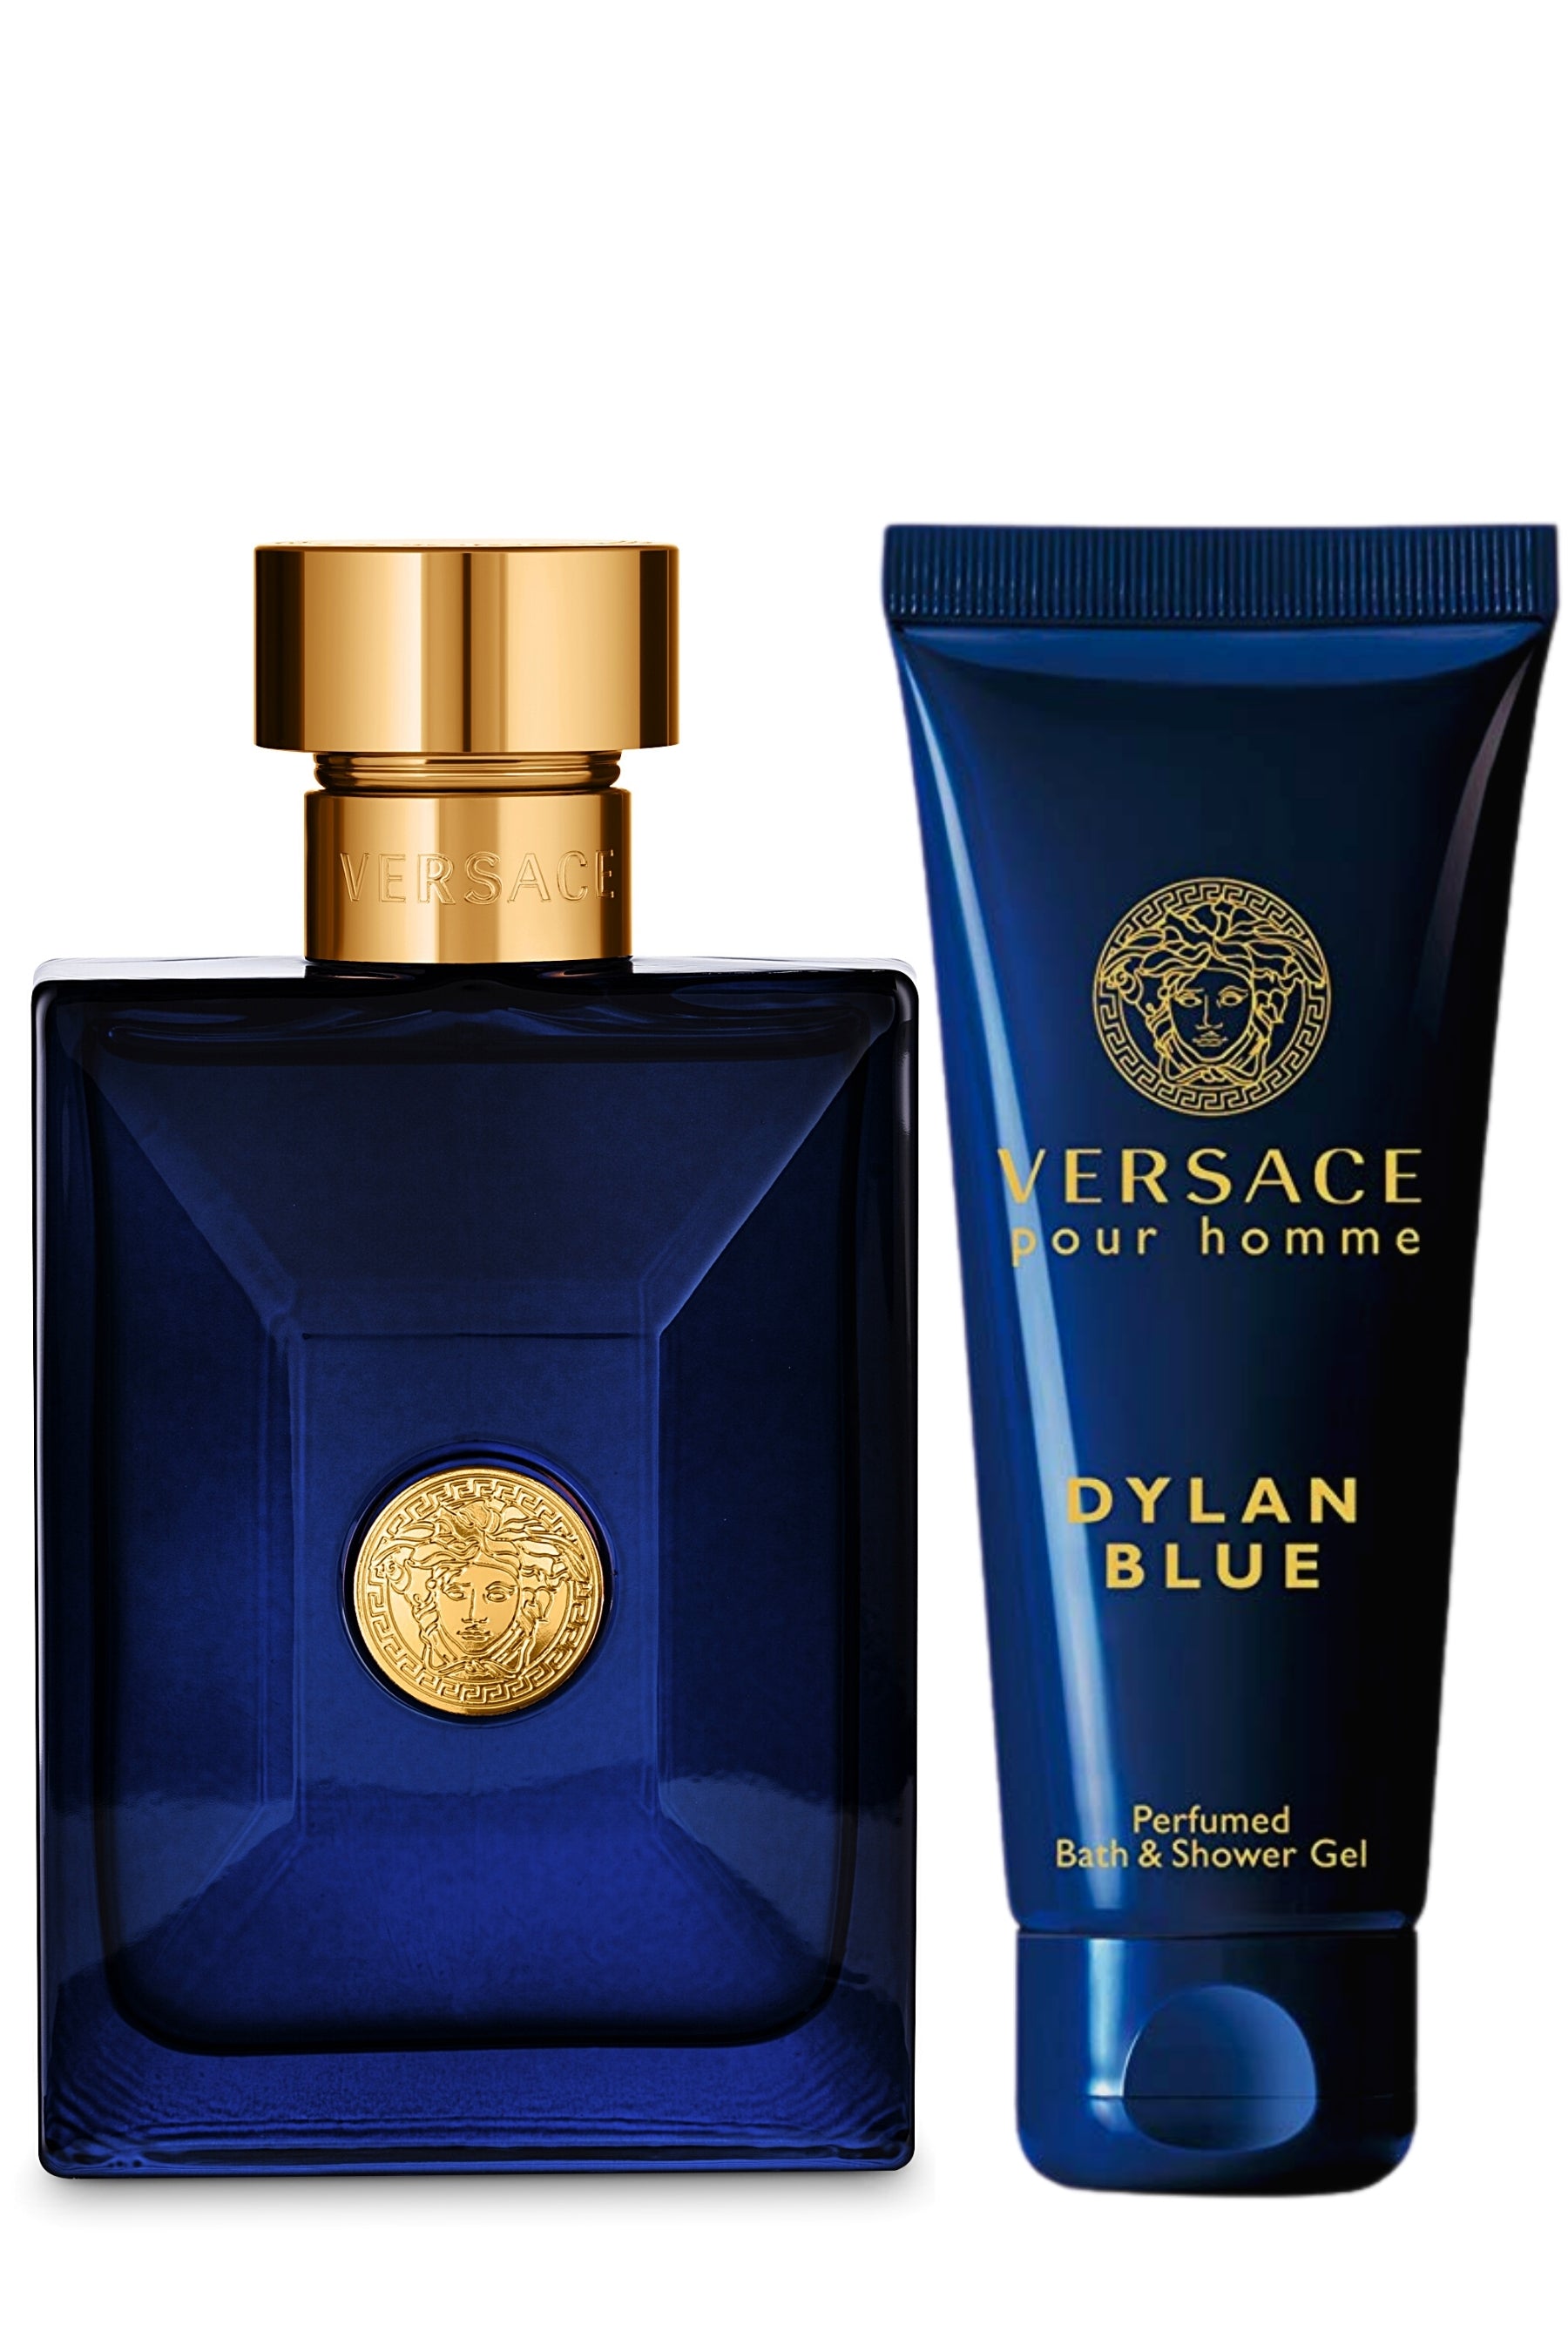 Versace Dylan Blue by Versace .17 oz EDT Mini for Men